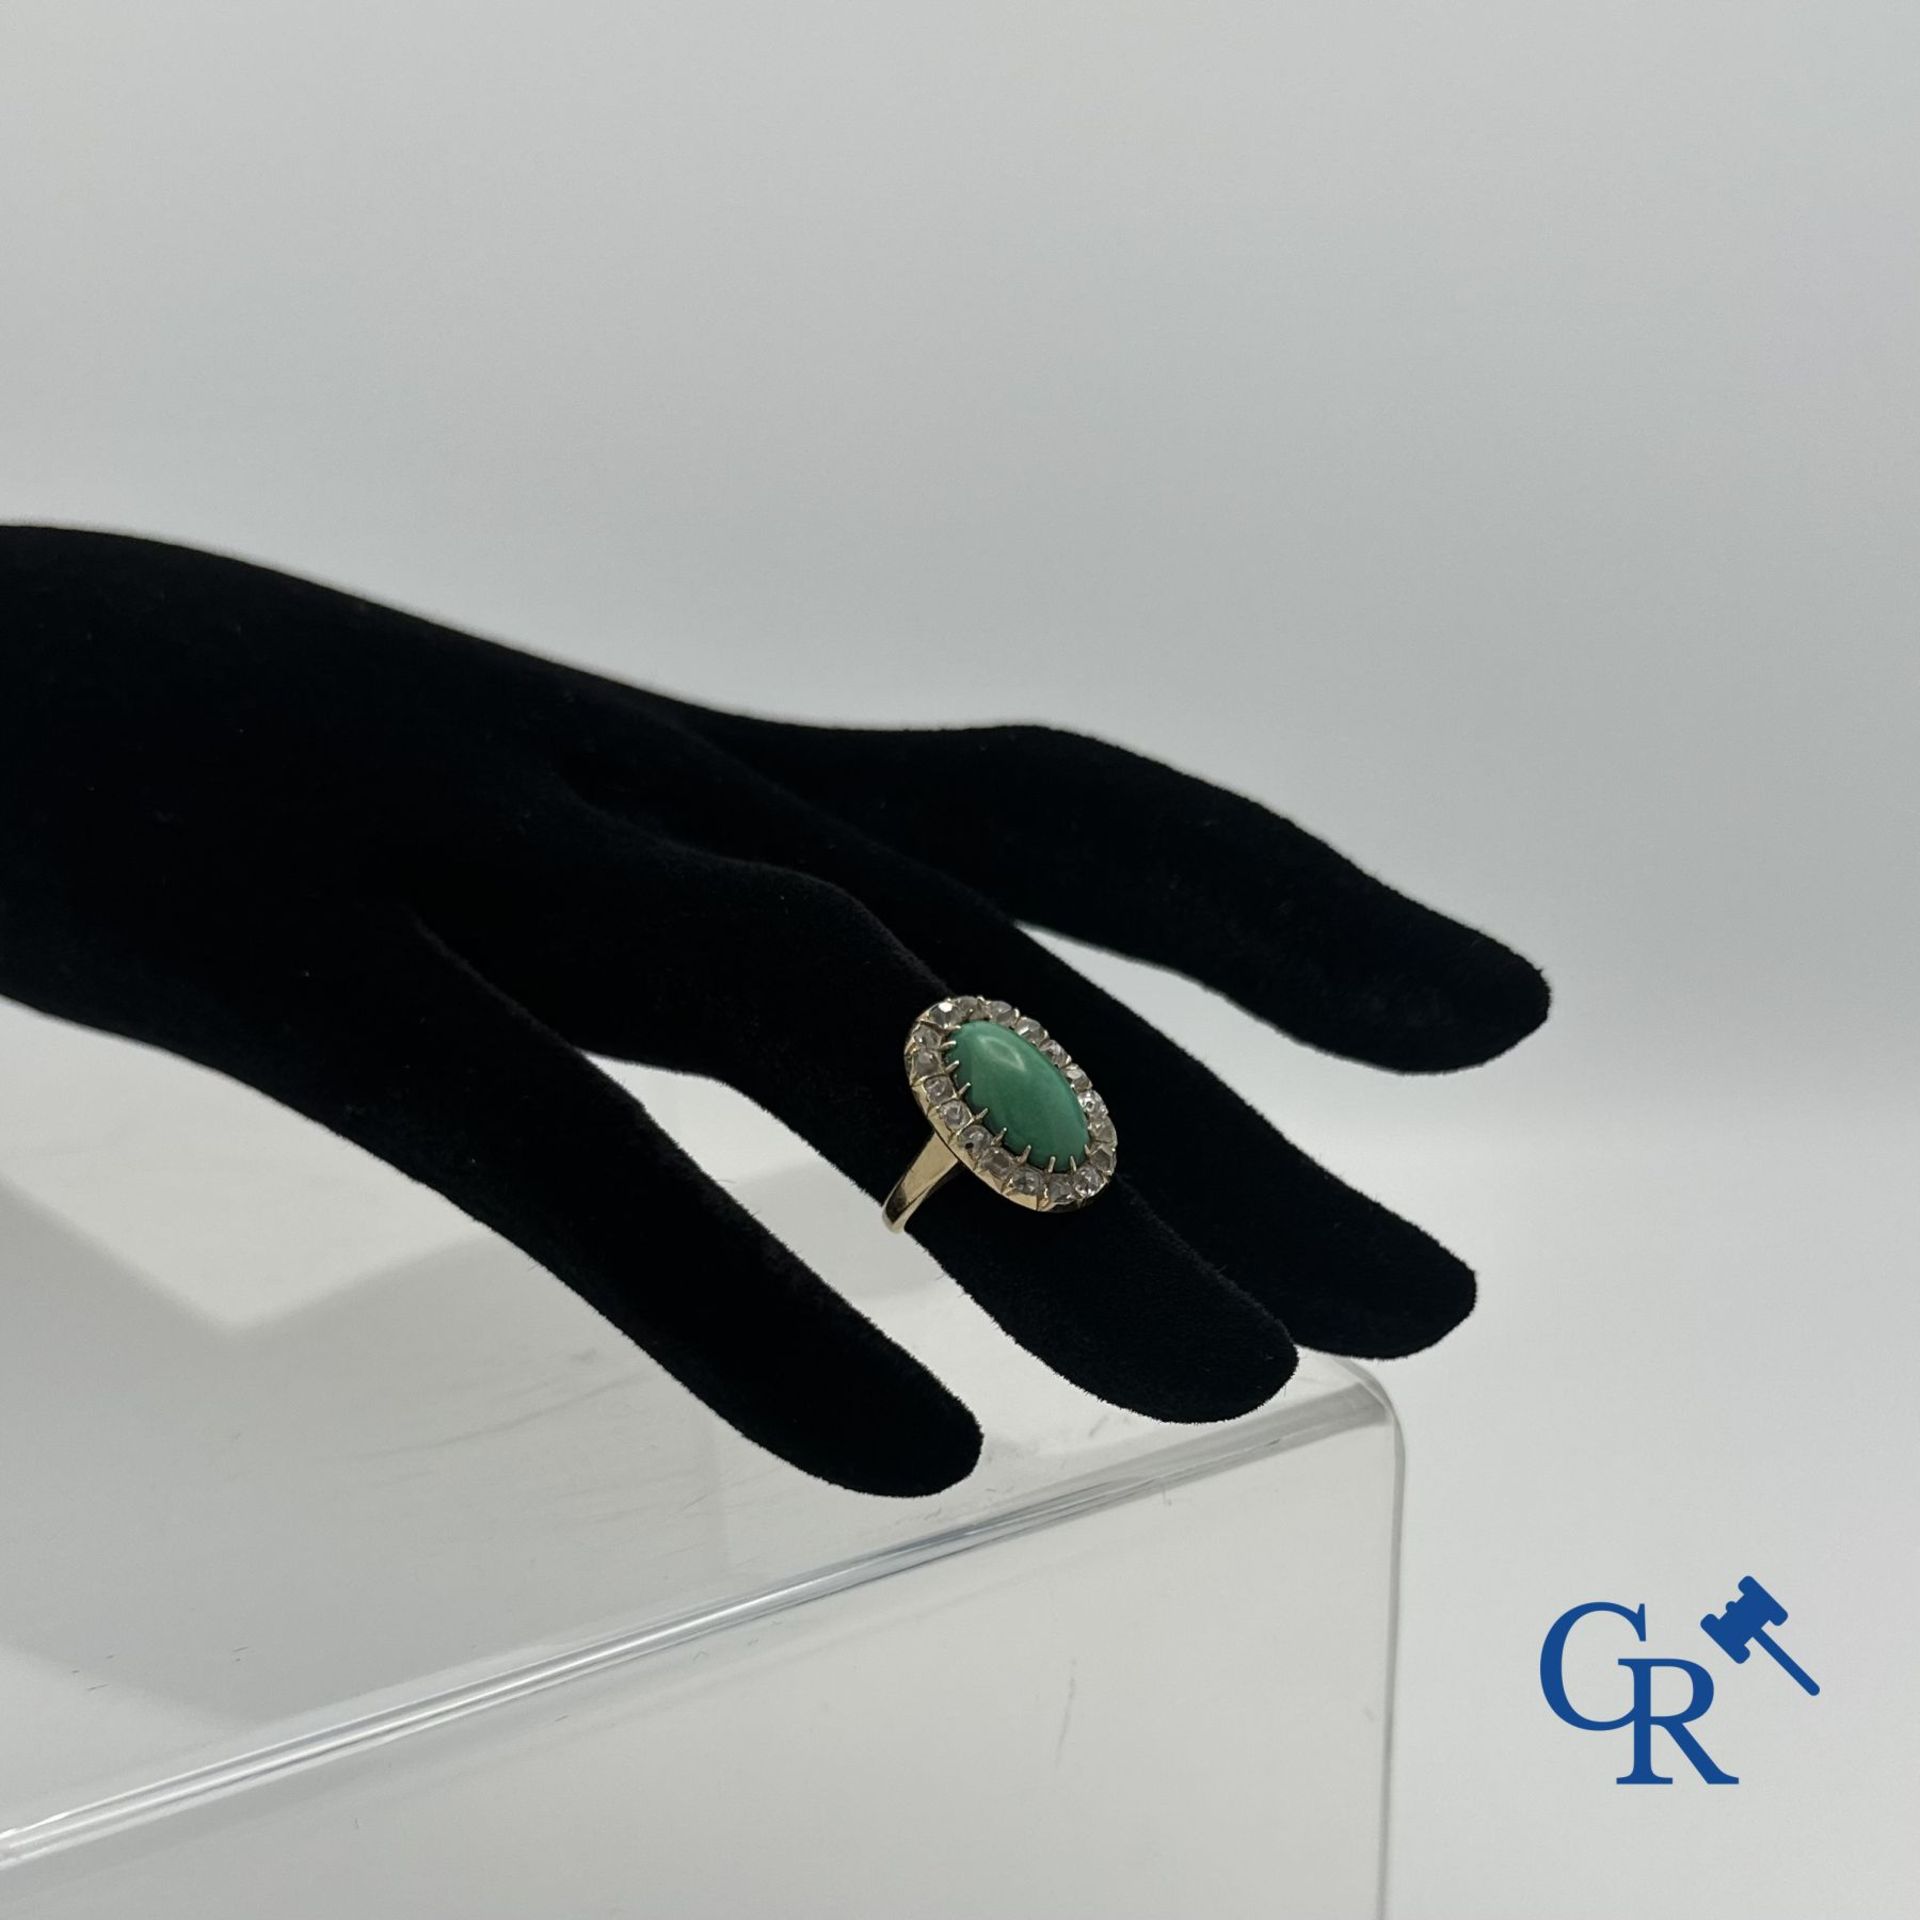 Jewellery: Ring in gold 18K set with malachite and 18 diamonds. - Image 2 of 3